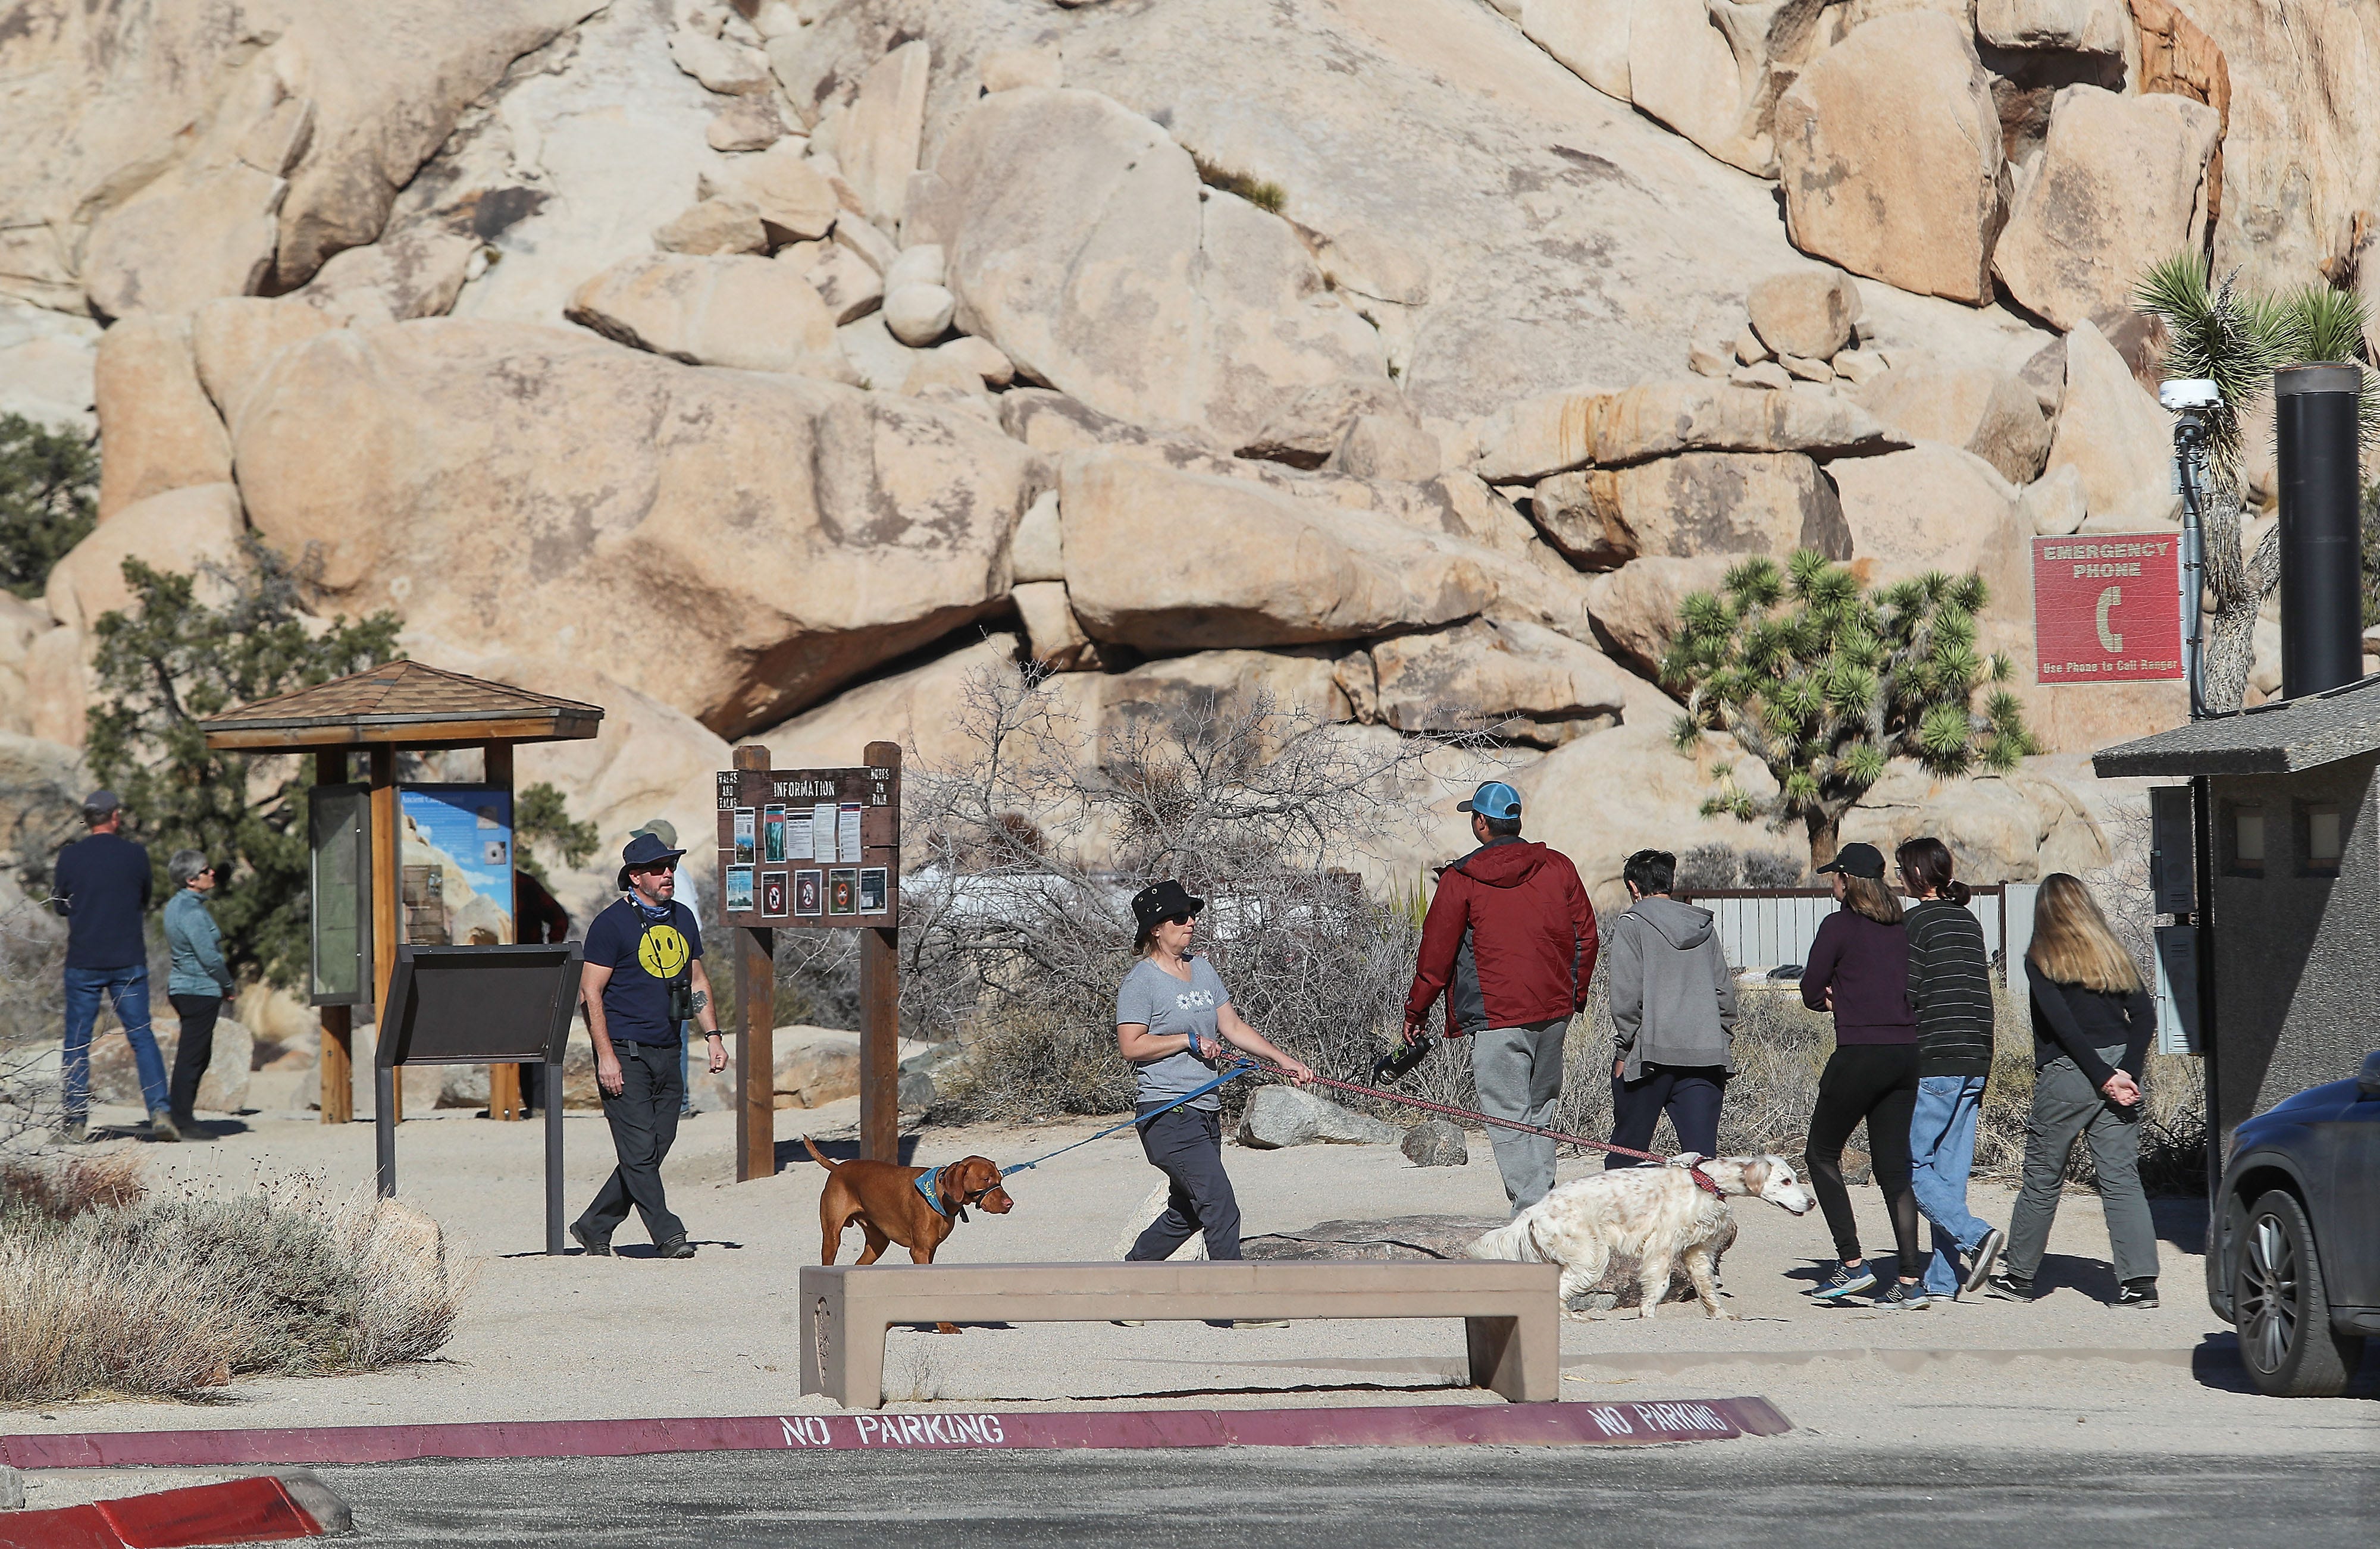 Visitors look around and use the facilities Jan. 24, 2022, at the Intersection Rock parking lot in Joshua Tree National Park. A large project on the drawing boards is building a new west entrance half a mile inside the park, and erecting four kiosks for visitors to buy entrance passes.